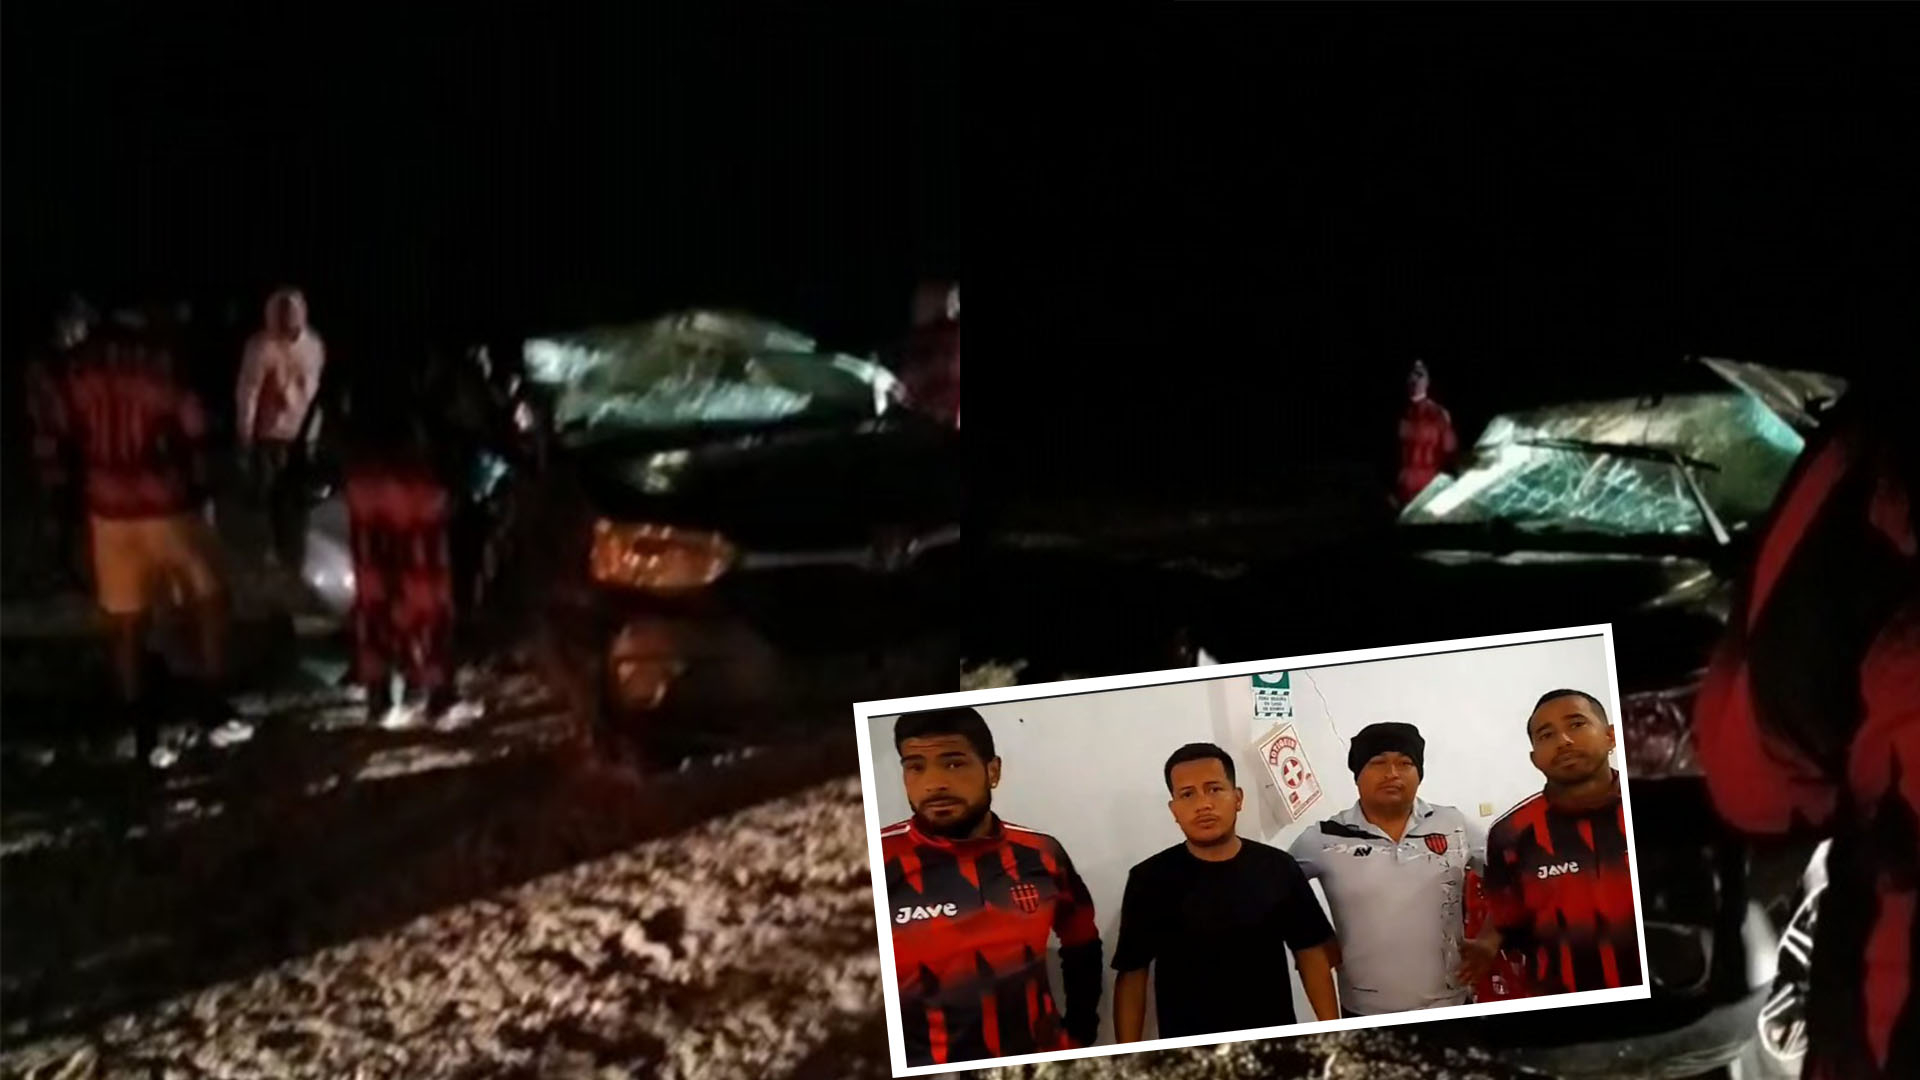 Copa Peru: The Tucos from Chiclayo have an accident in Piura and miraculously survive.